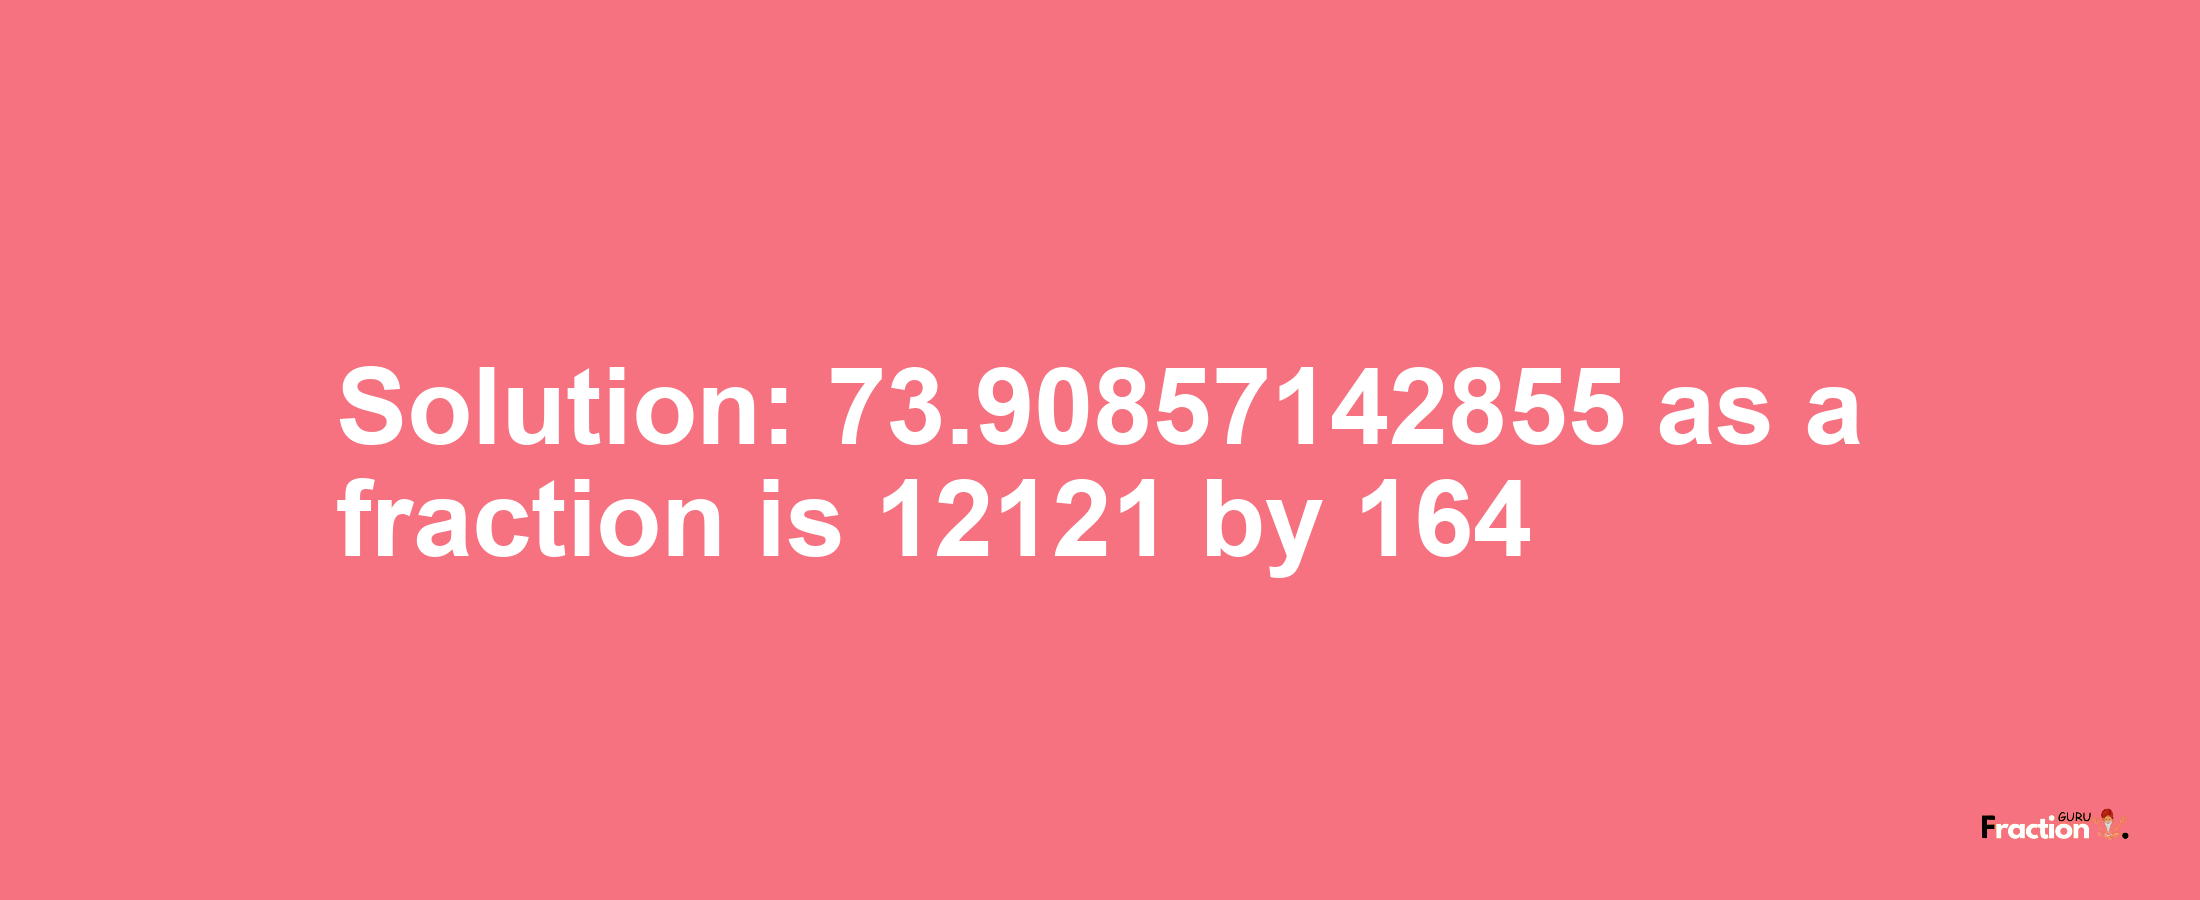 Solution:73.90857142855 as a fraction is 12121/164